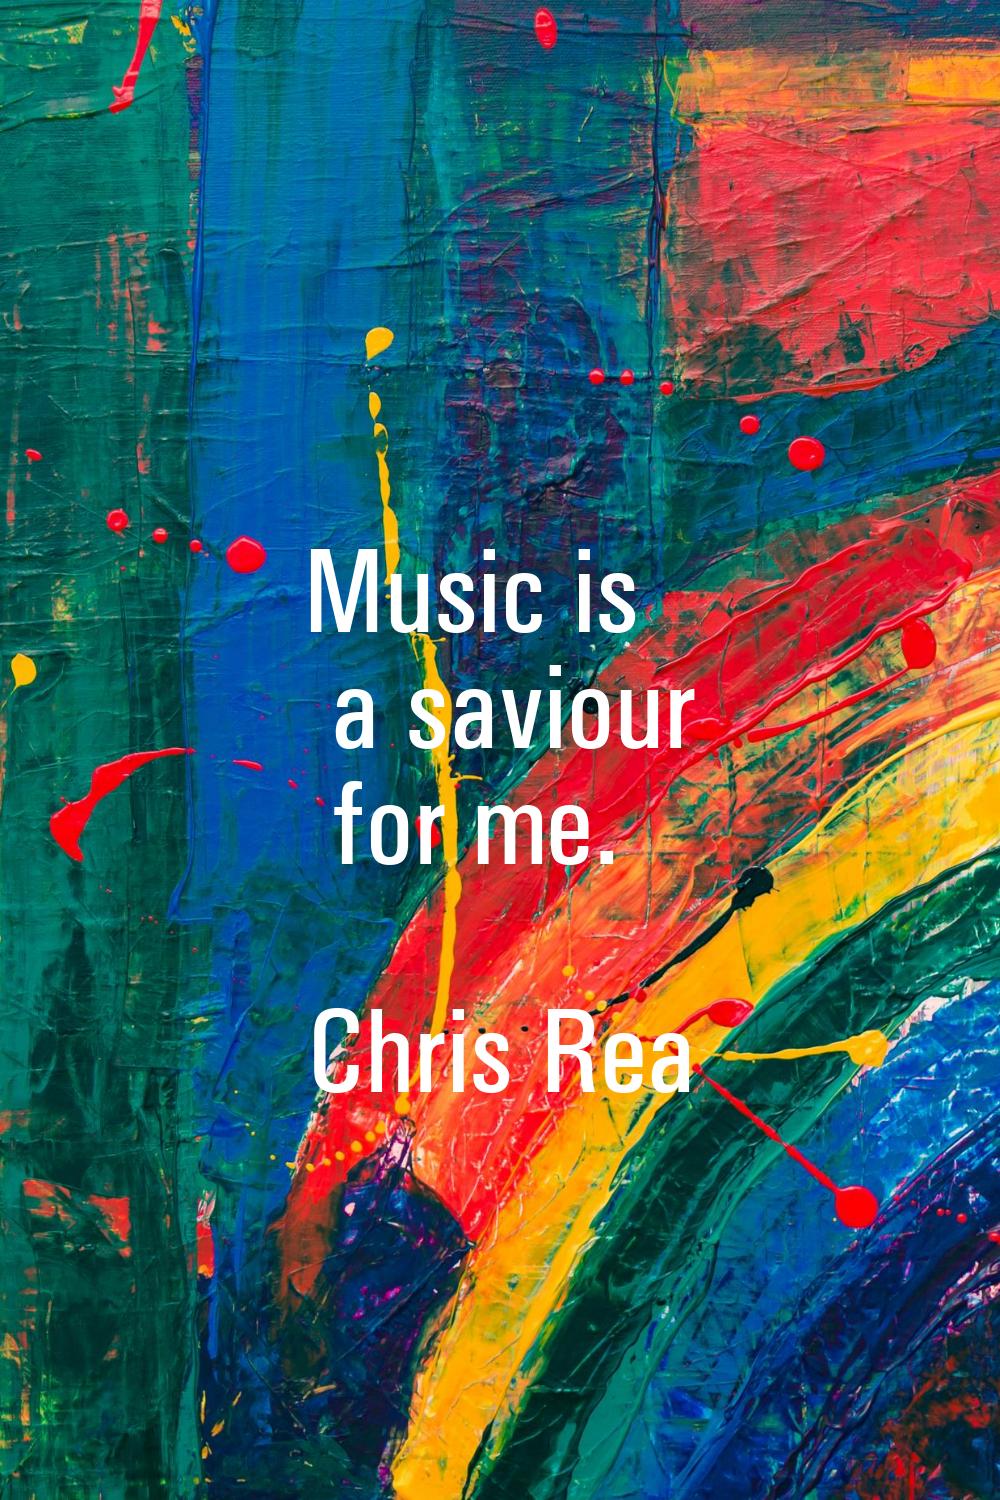 Music is a saviour for me.